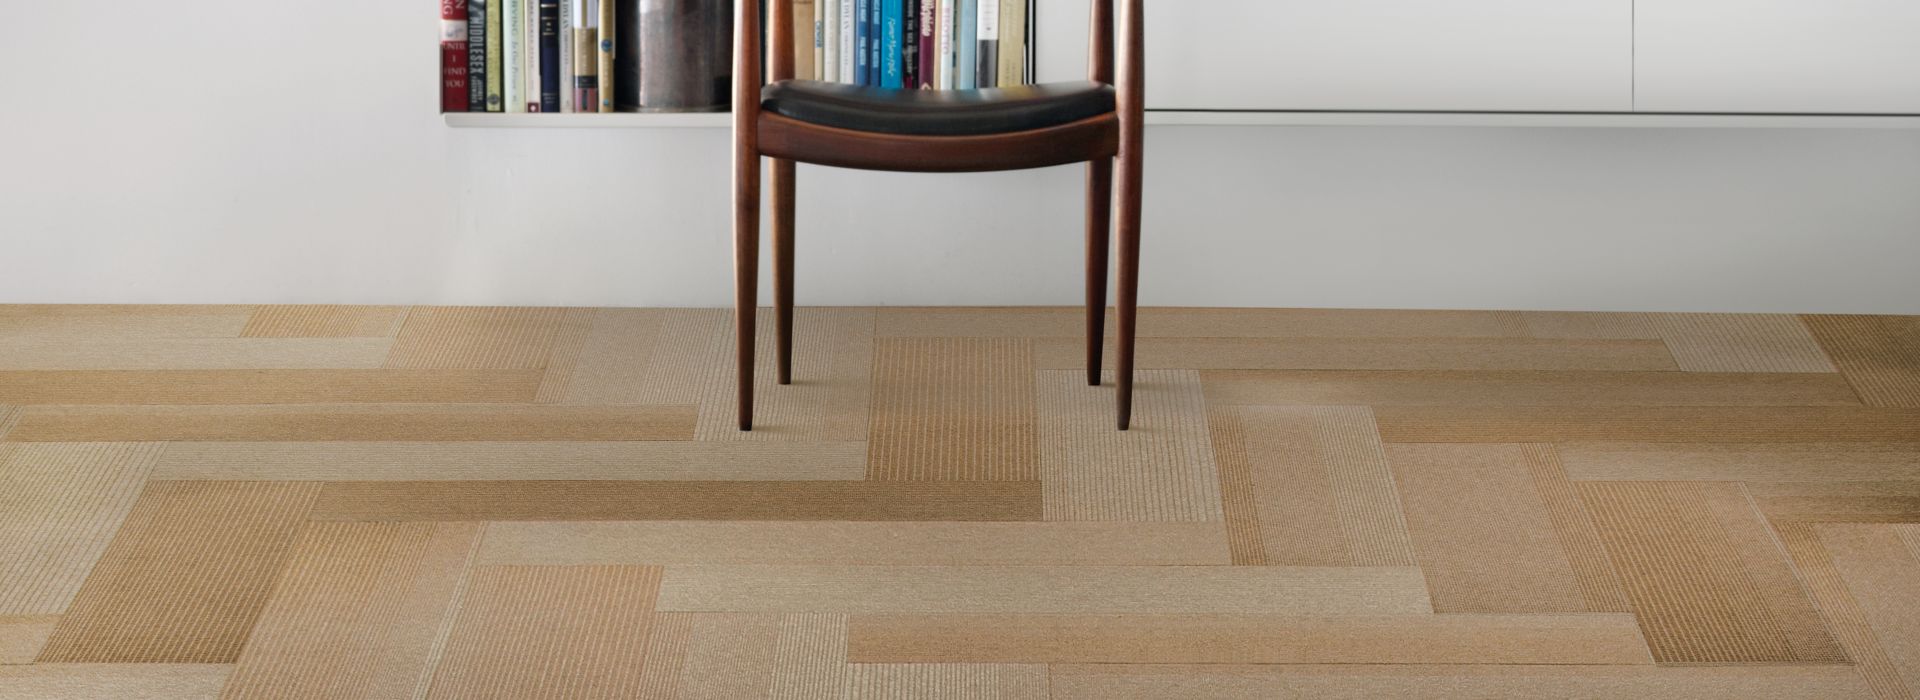 Interface B701 plank carpet tile in front of bookcase with wood chair image number 1